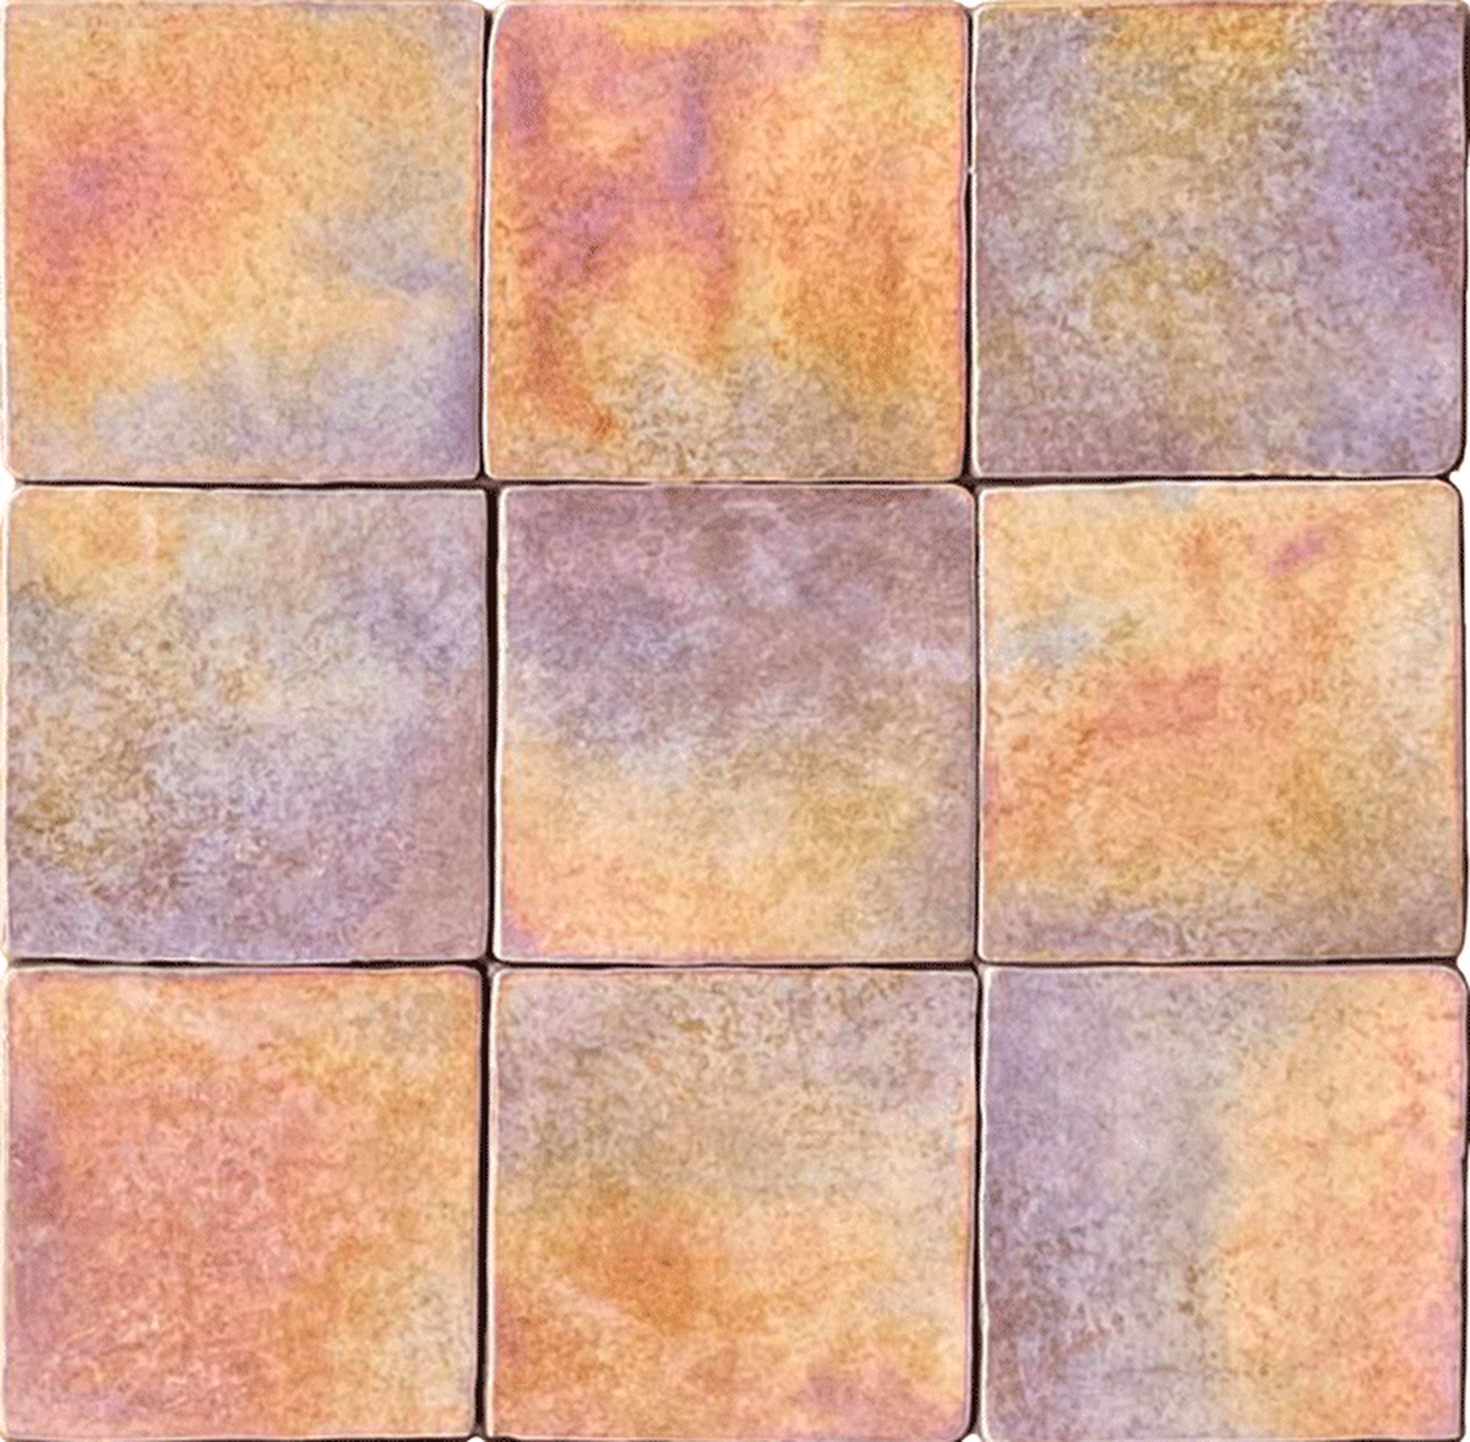 Pink square wall tiles with iridescent effect. White body